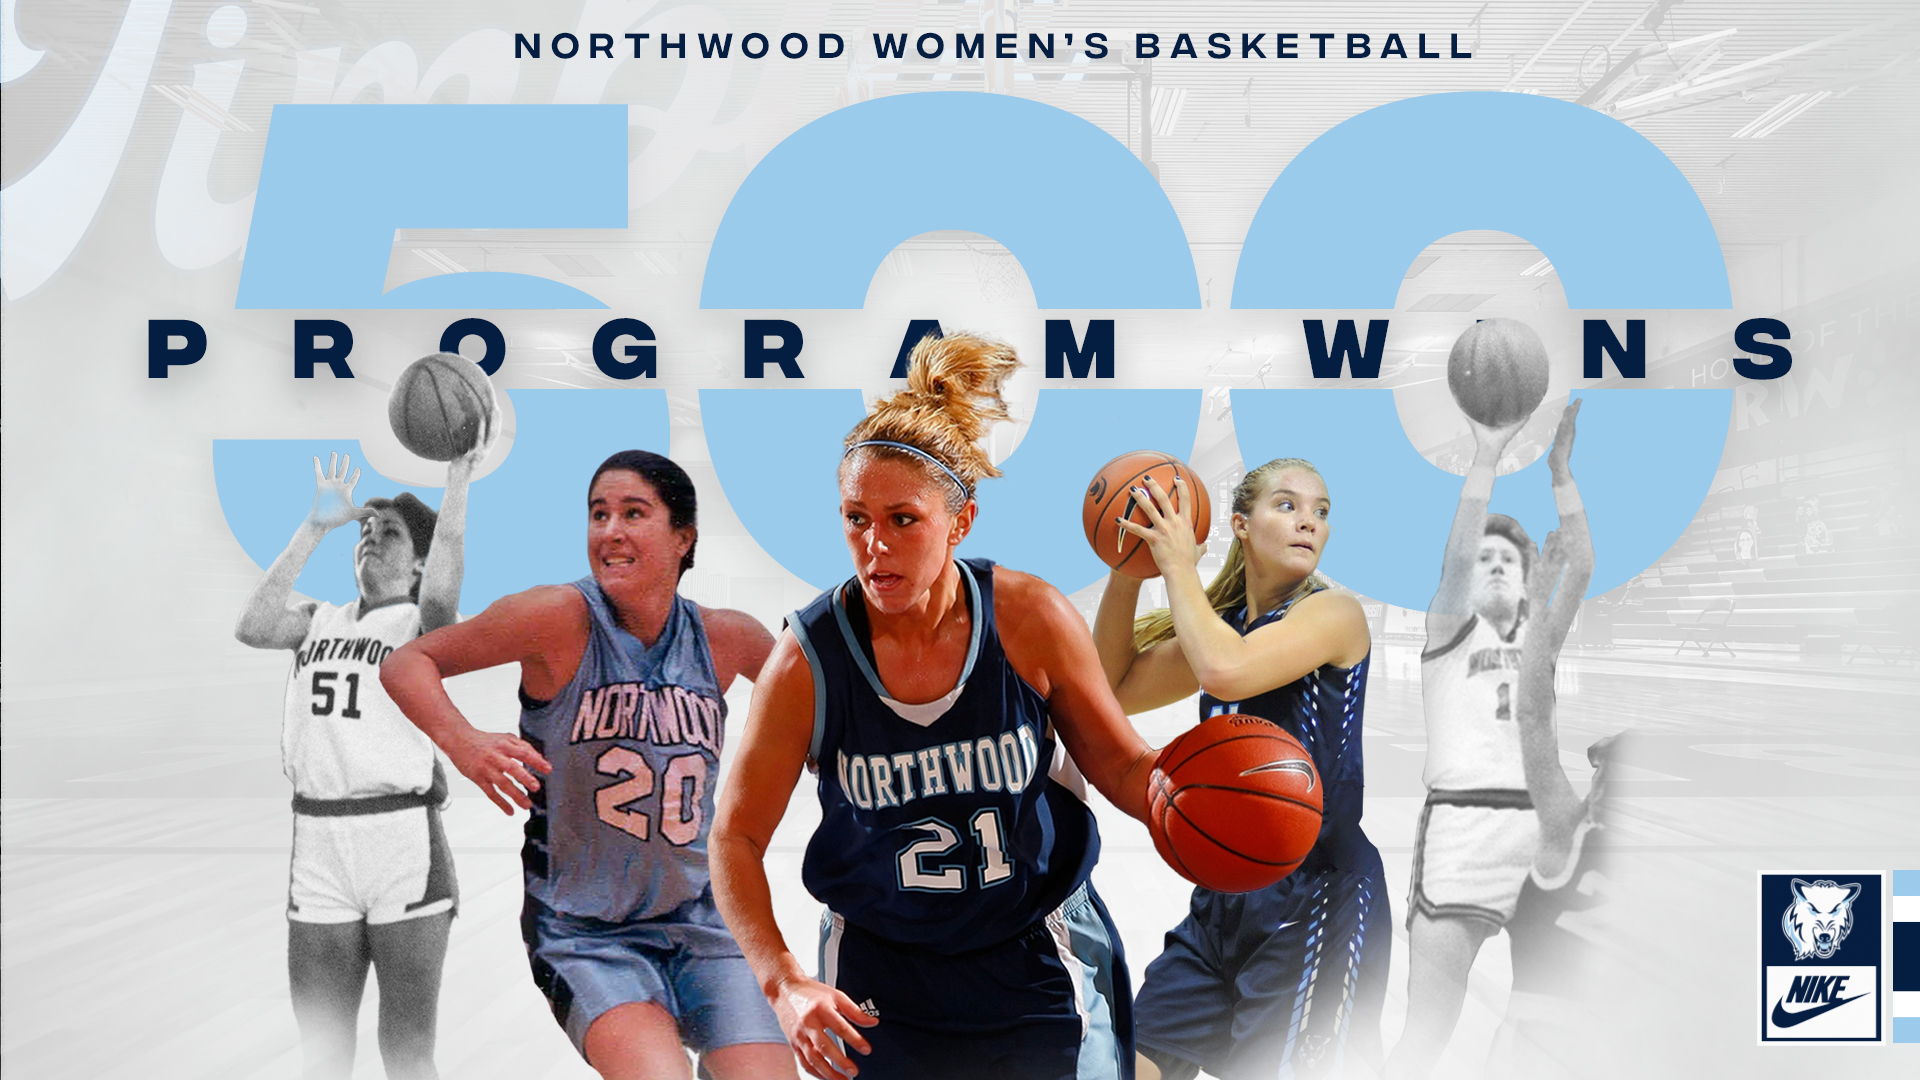 500! Women's Basketball Picks Up 500th Win In Program History With 80-72 Victory Over Hillsdale